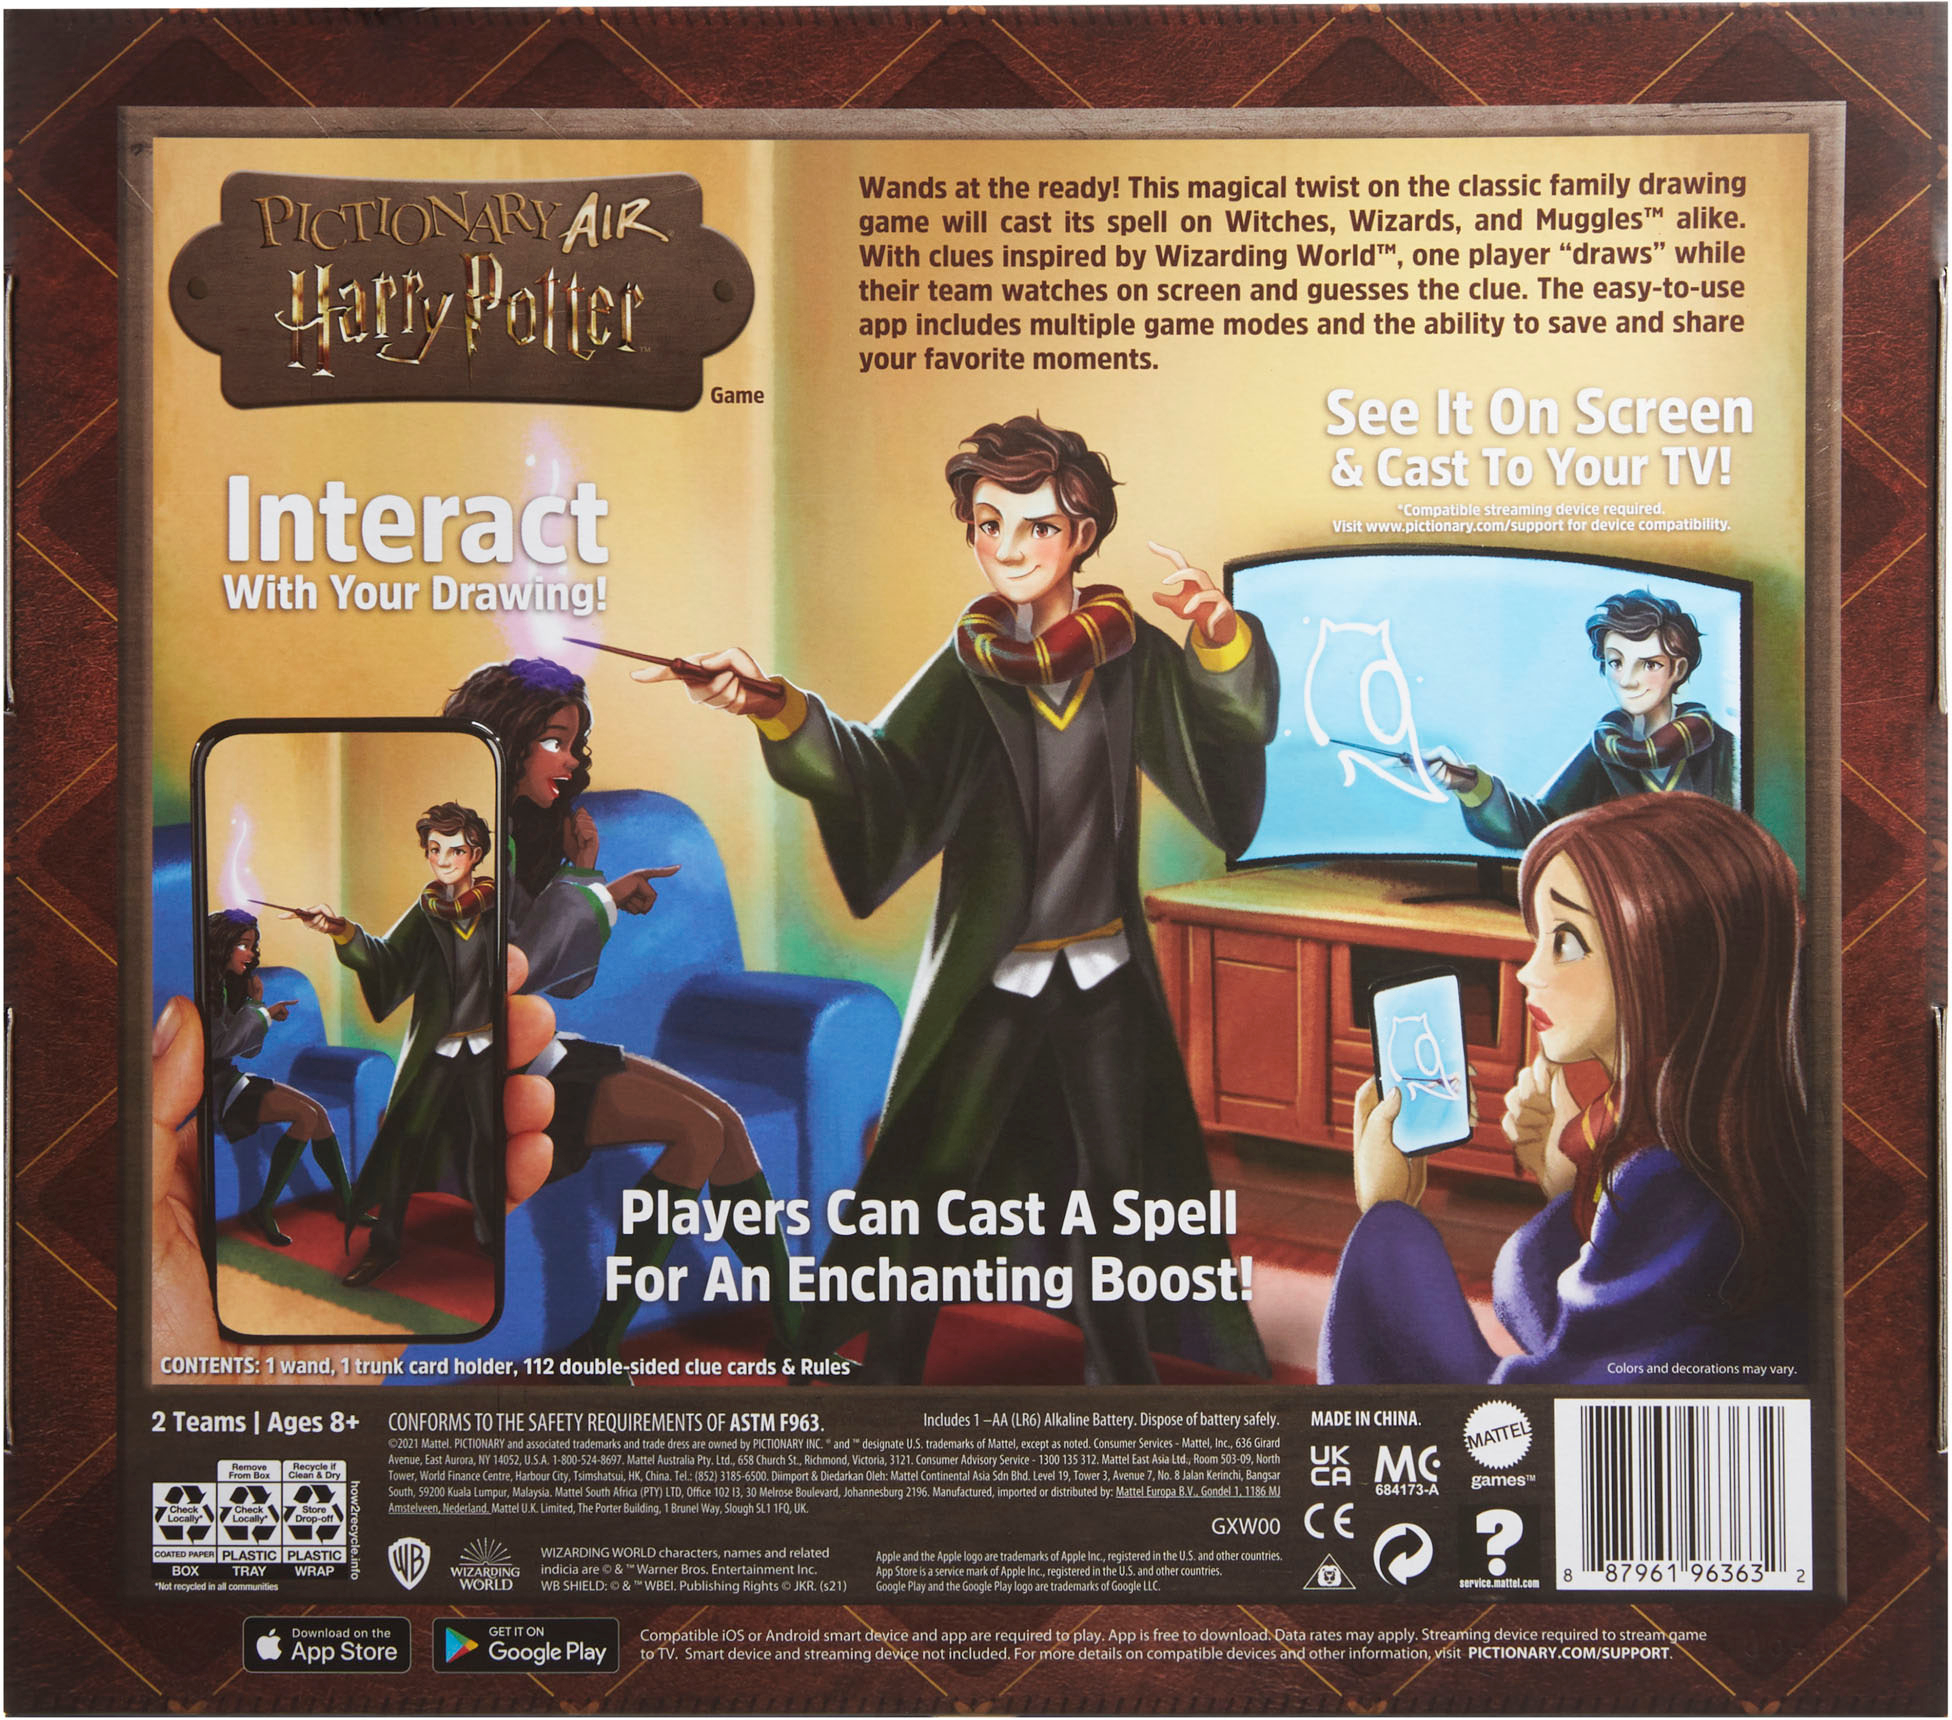 Buy Potter GXW00 - Best Air Pictionary Harry